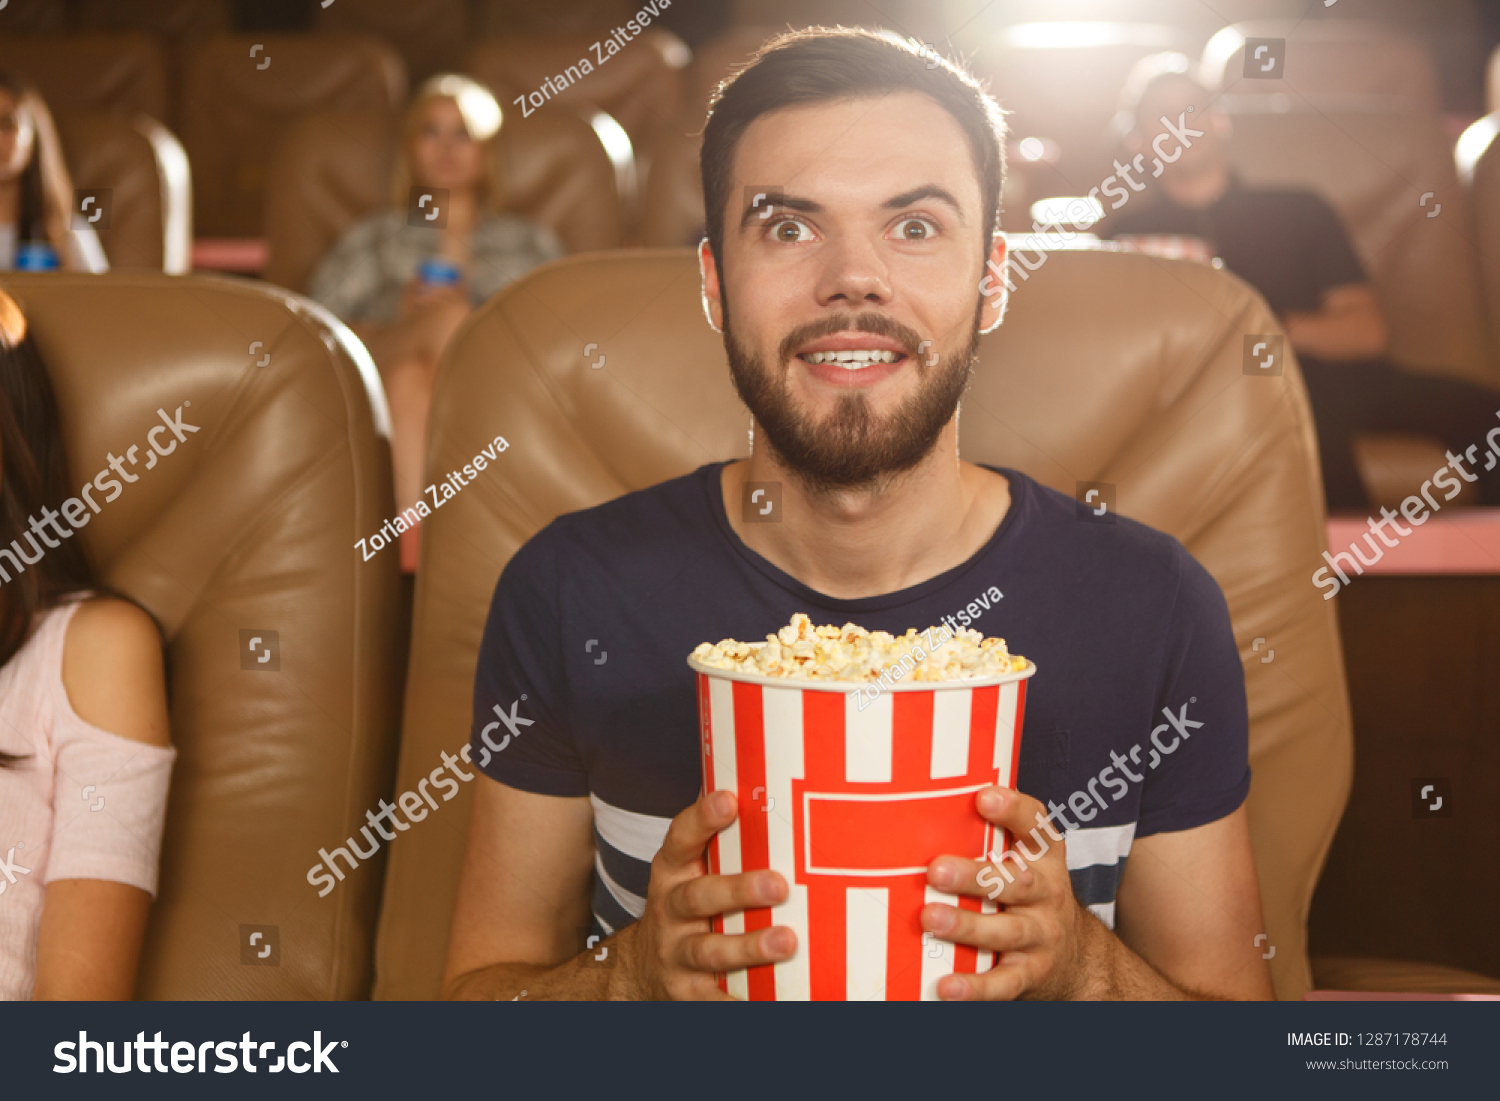 Excited male viewer keeping popcorn in hands and watching interesting film in cinema. Young bearded man wearing shirt expecting final of movie. Concept of entertainment and leisure. #1287178744